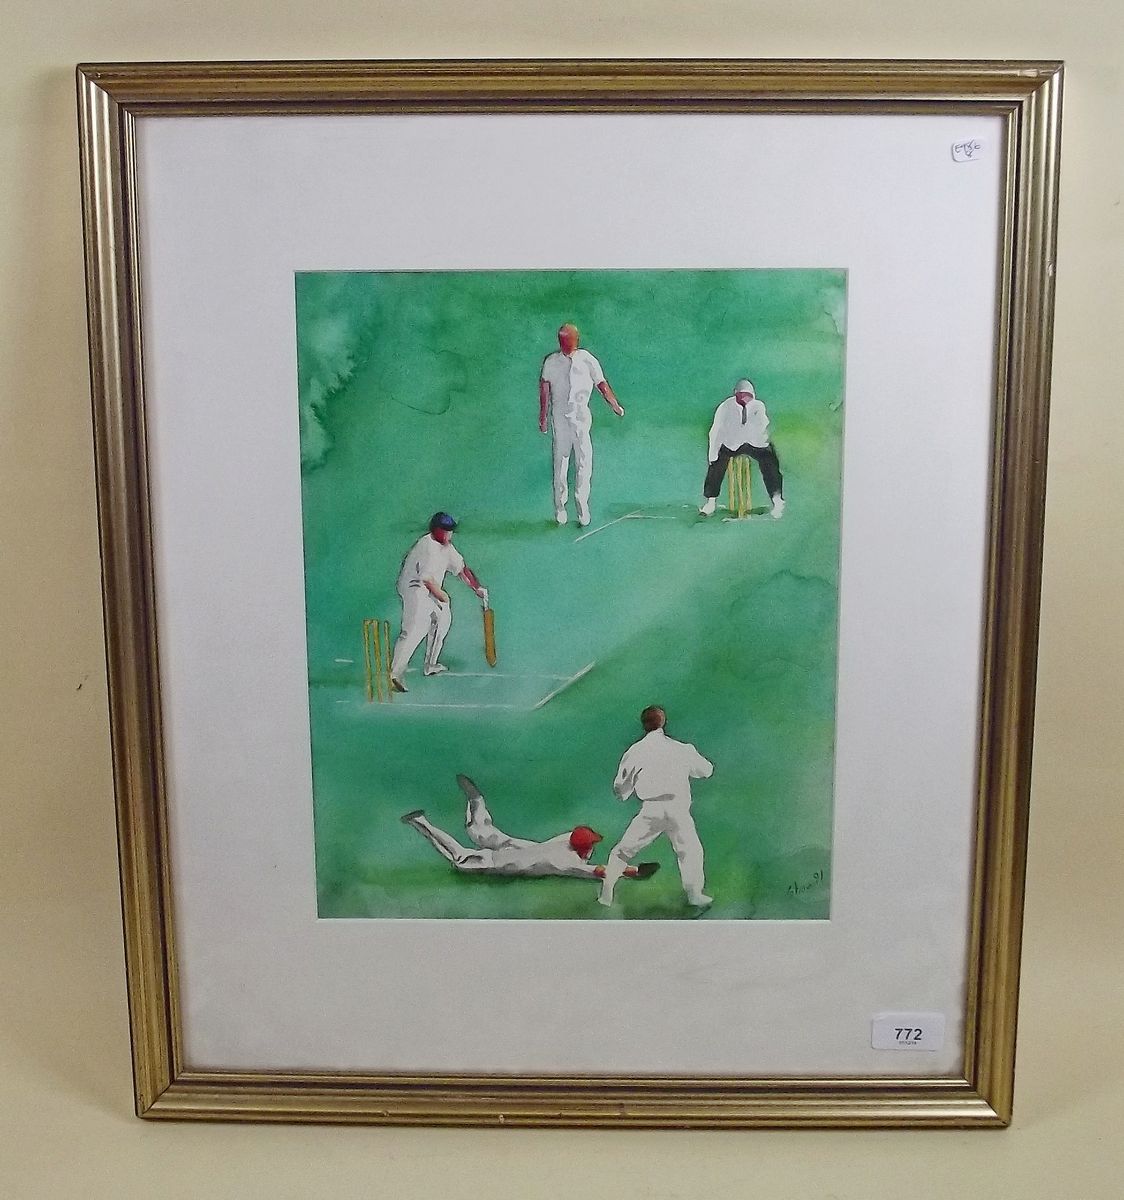 Shaw - watercolour of cricket match - framed and glazed, 34 x 27cm